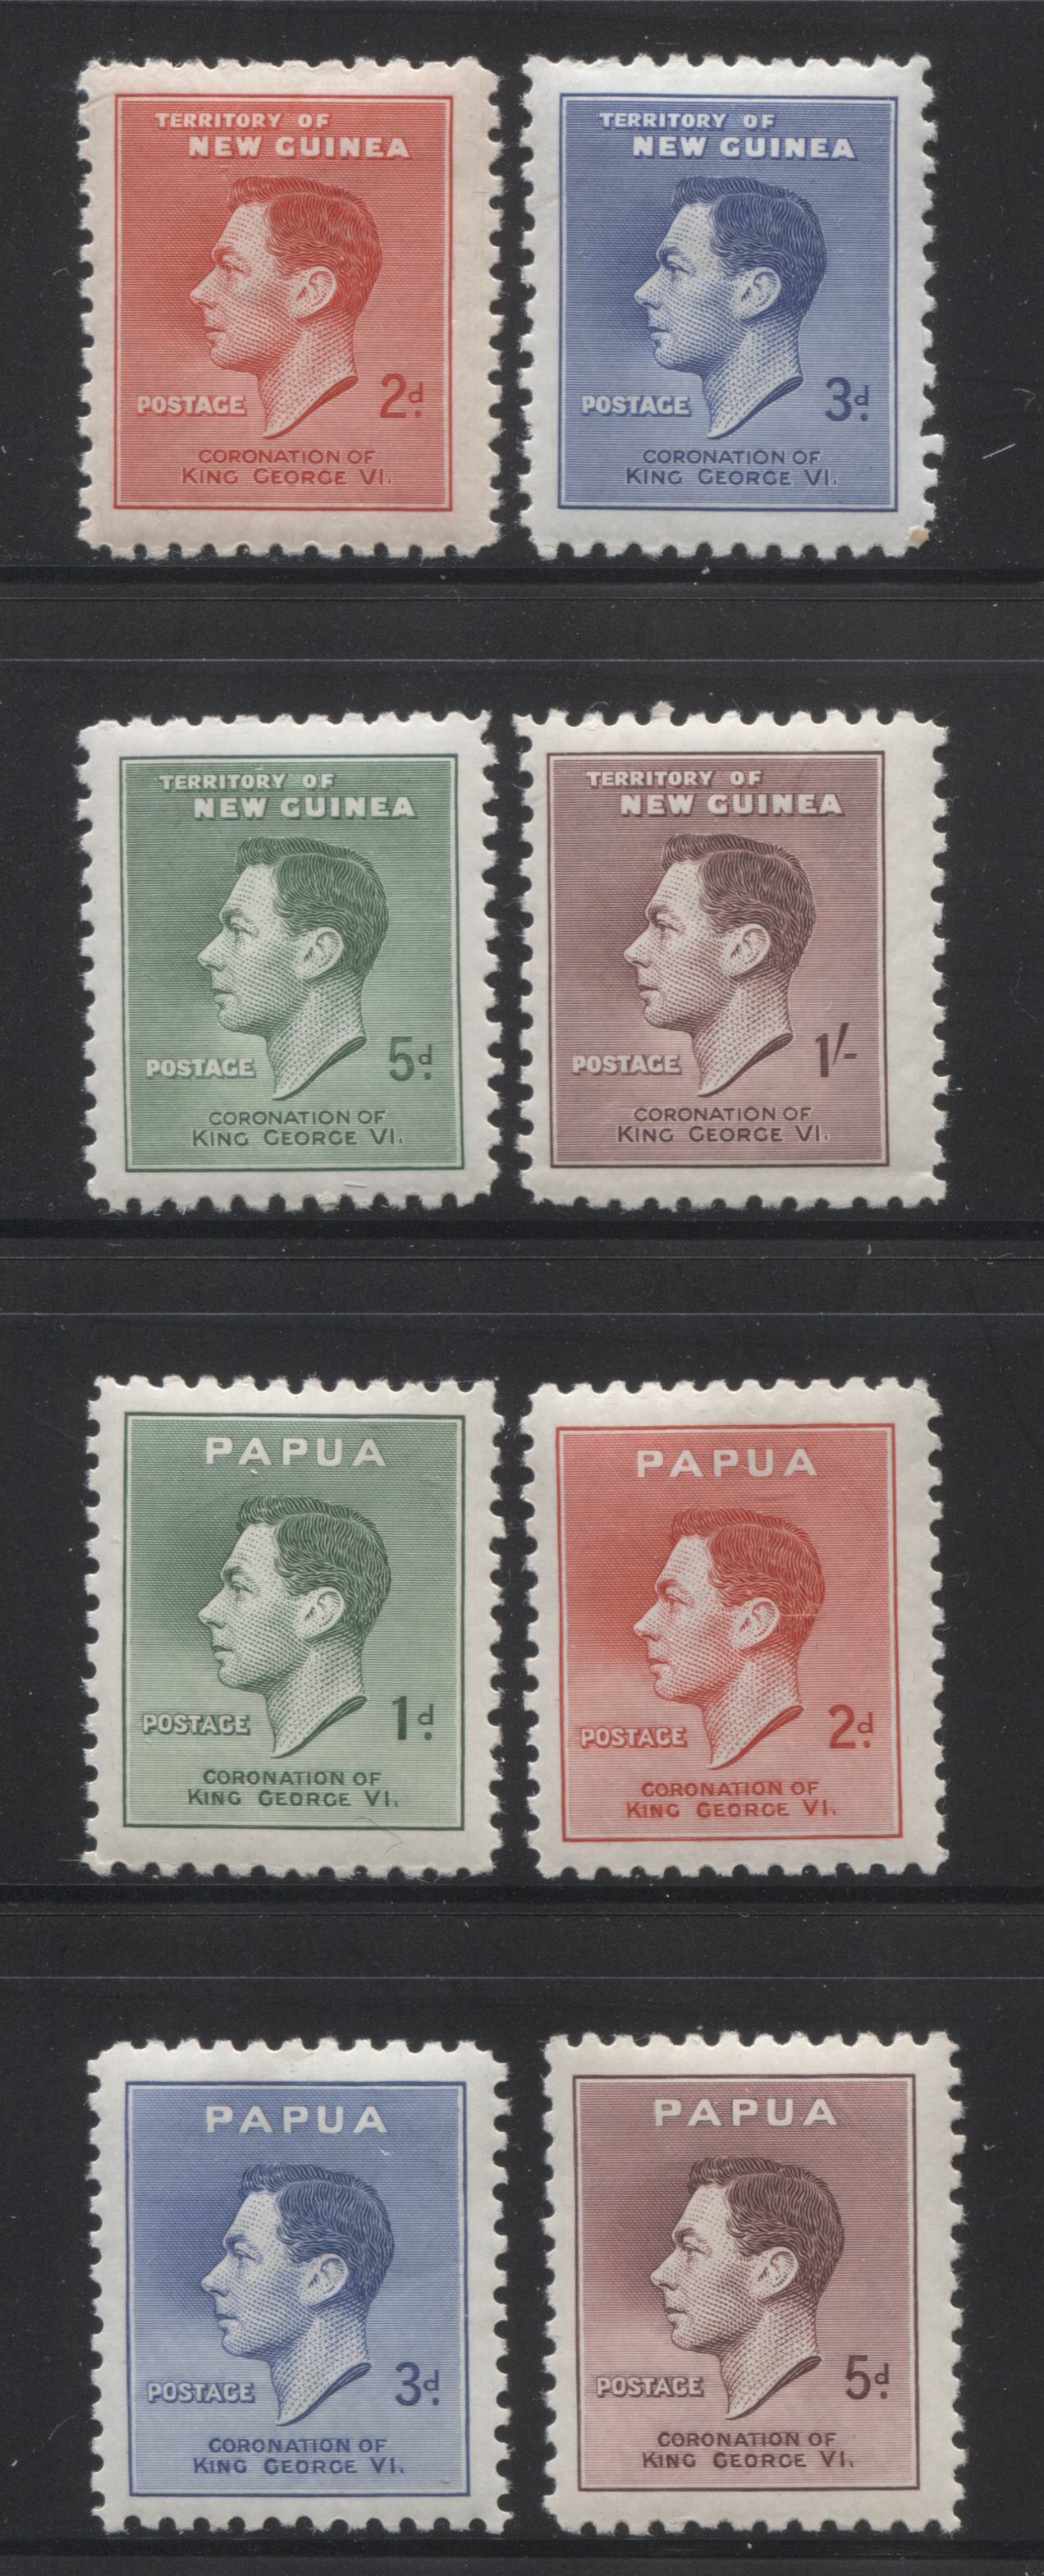 Lot 85 Australia - Papua and New Guinea SG#154-162, 208-211 1937 Coronation and 1938 Jubilee Issue, Complete Mostly VF And ALL NH Sets, SG Cat. 43.80 GBP = $74.46